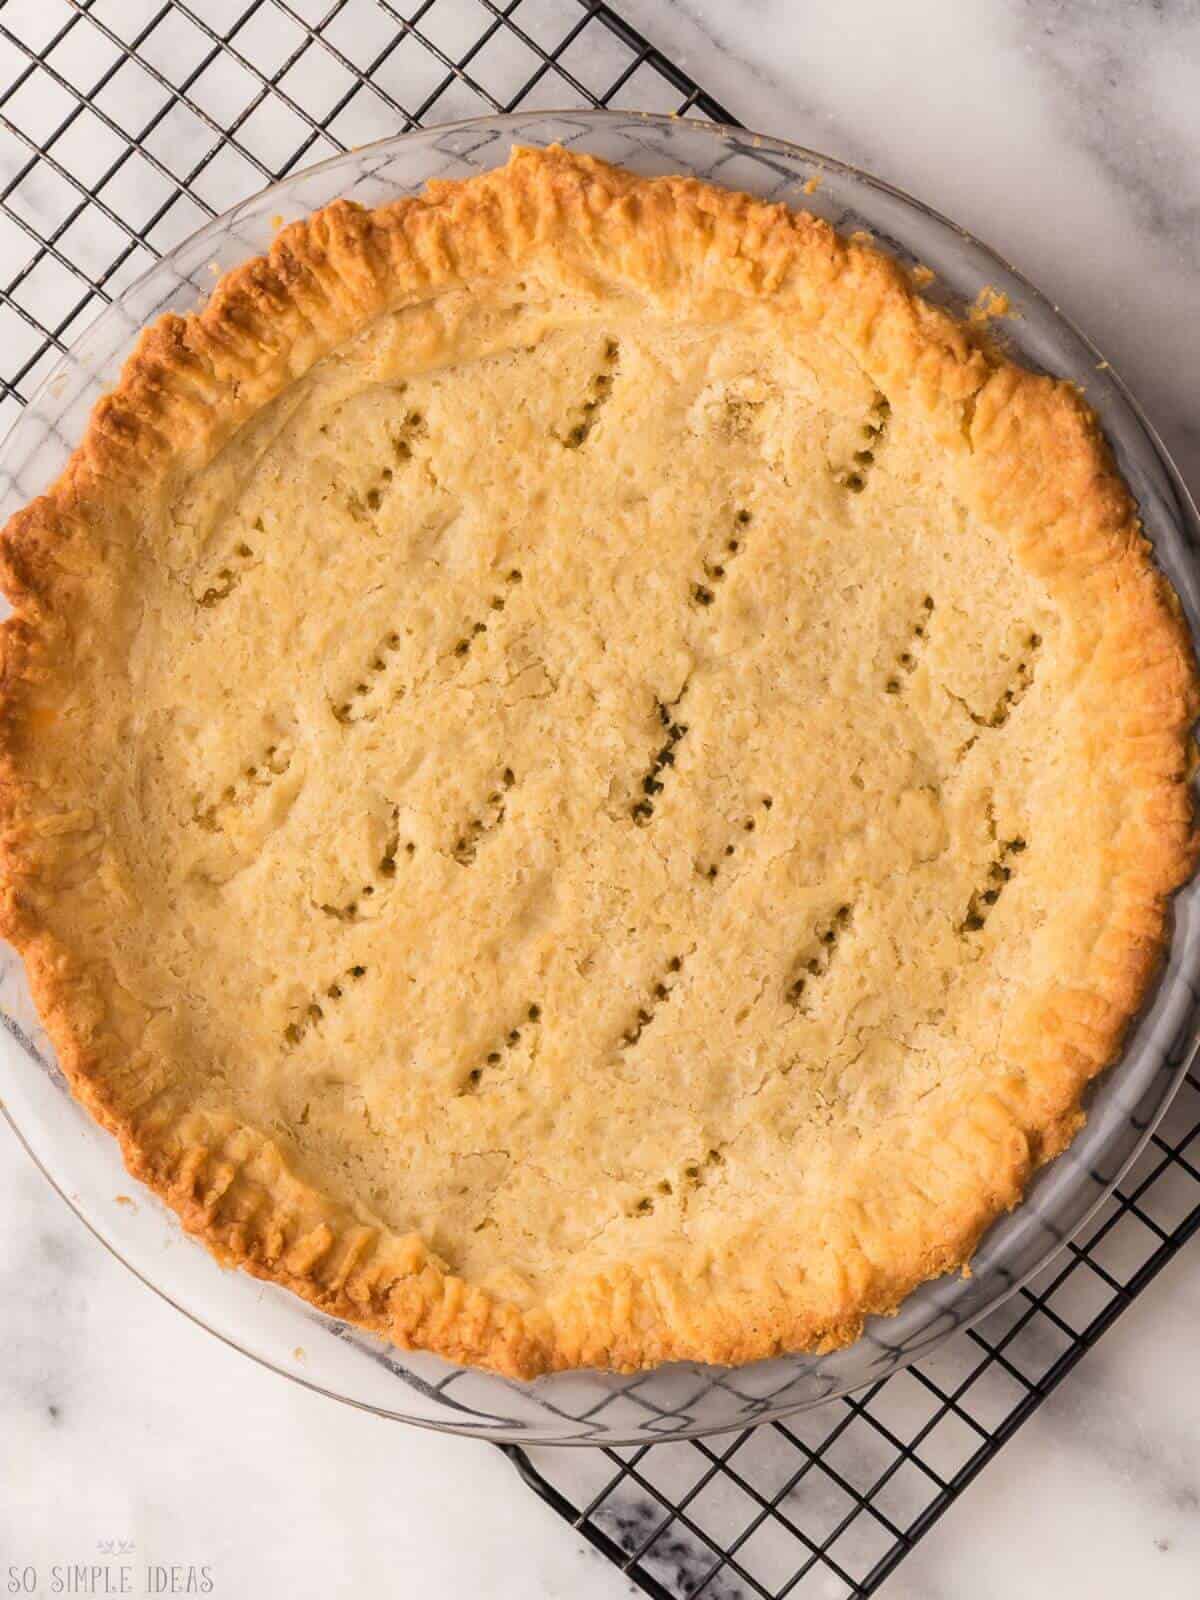 carbquik pie crust cooling on rack.